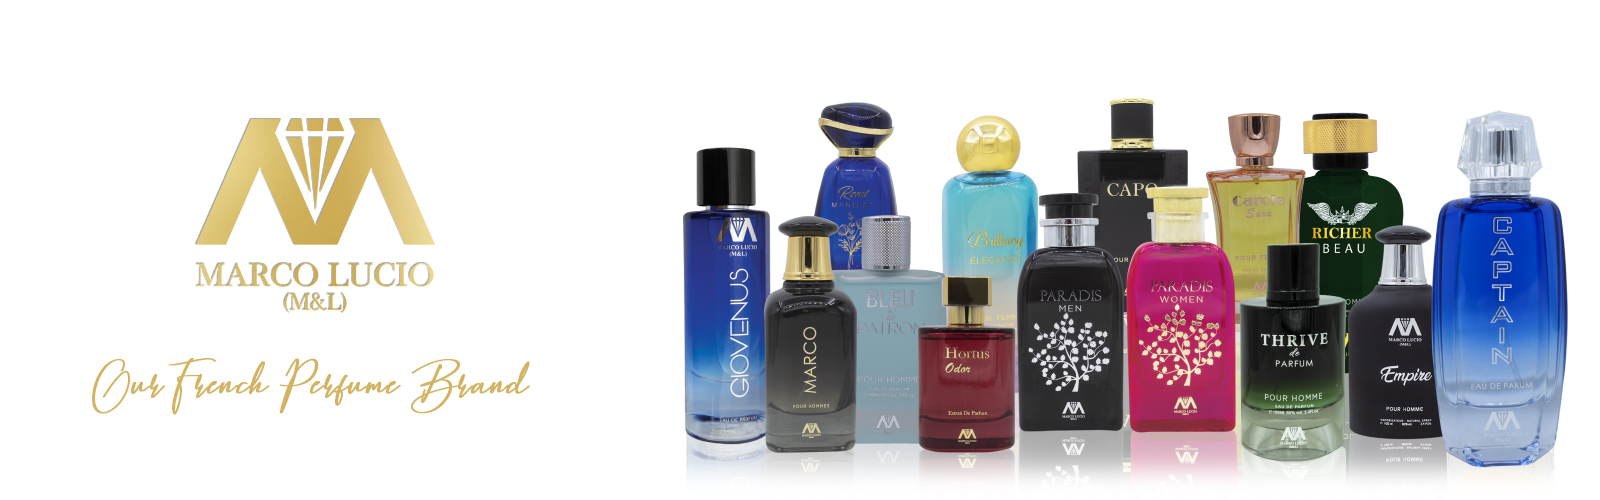 Marco Lucio Perfume which are manufactured by ARD PERFUMES brand